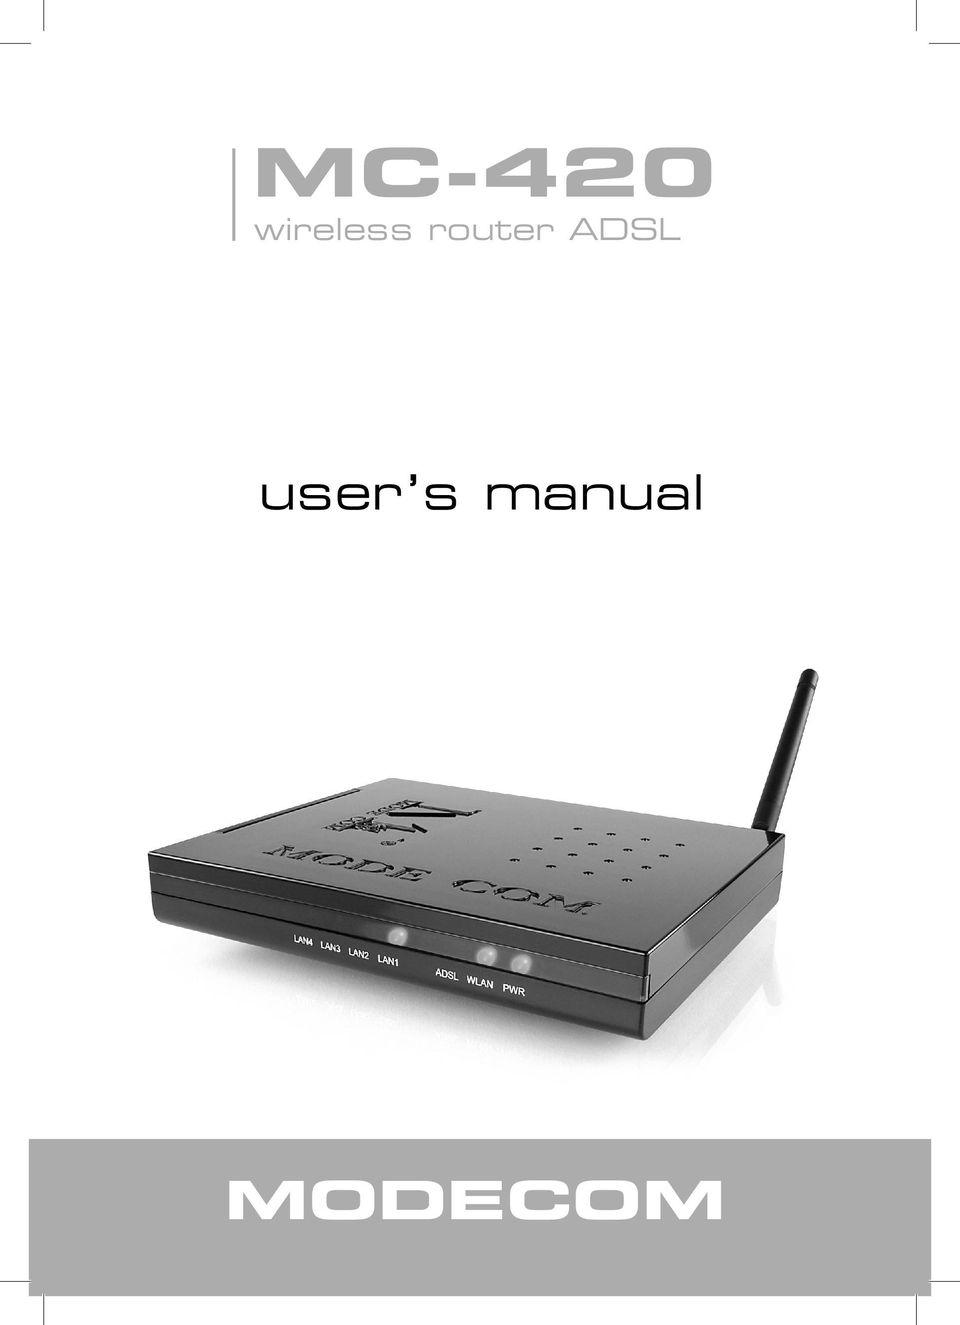 router ADSL